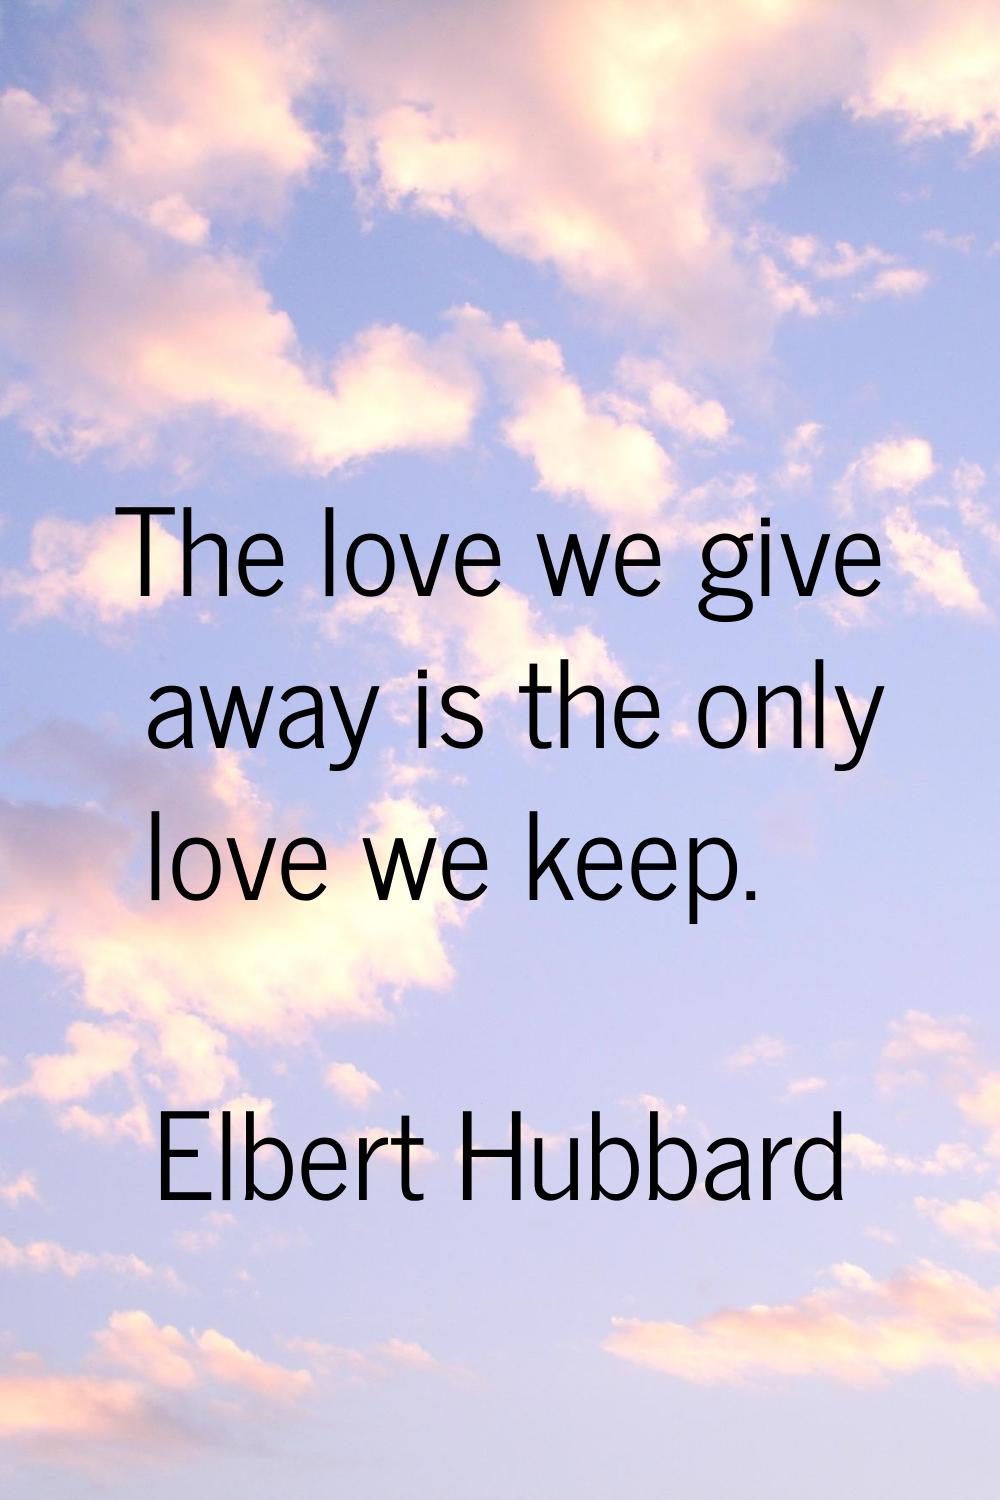 The love we give away is the only love we keep.